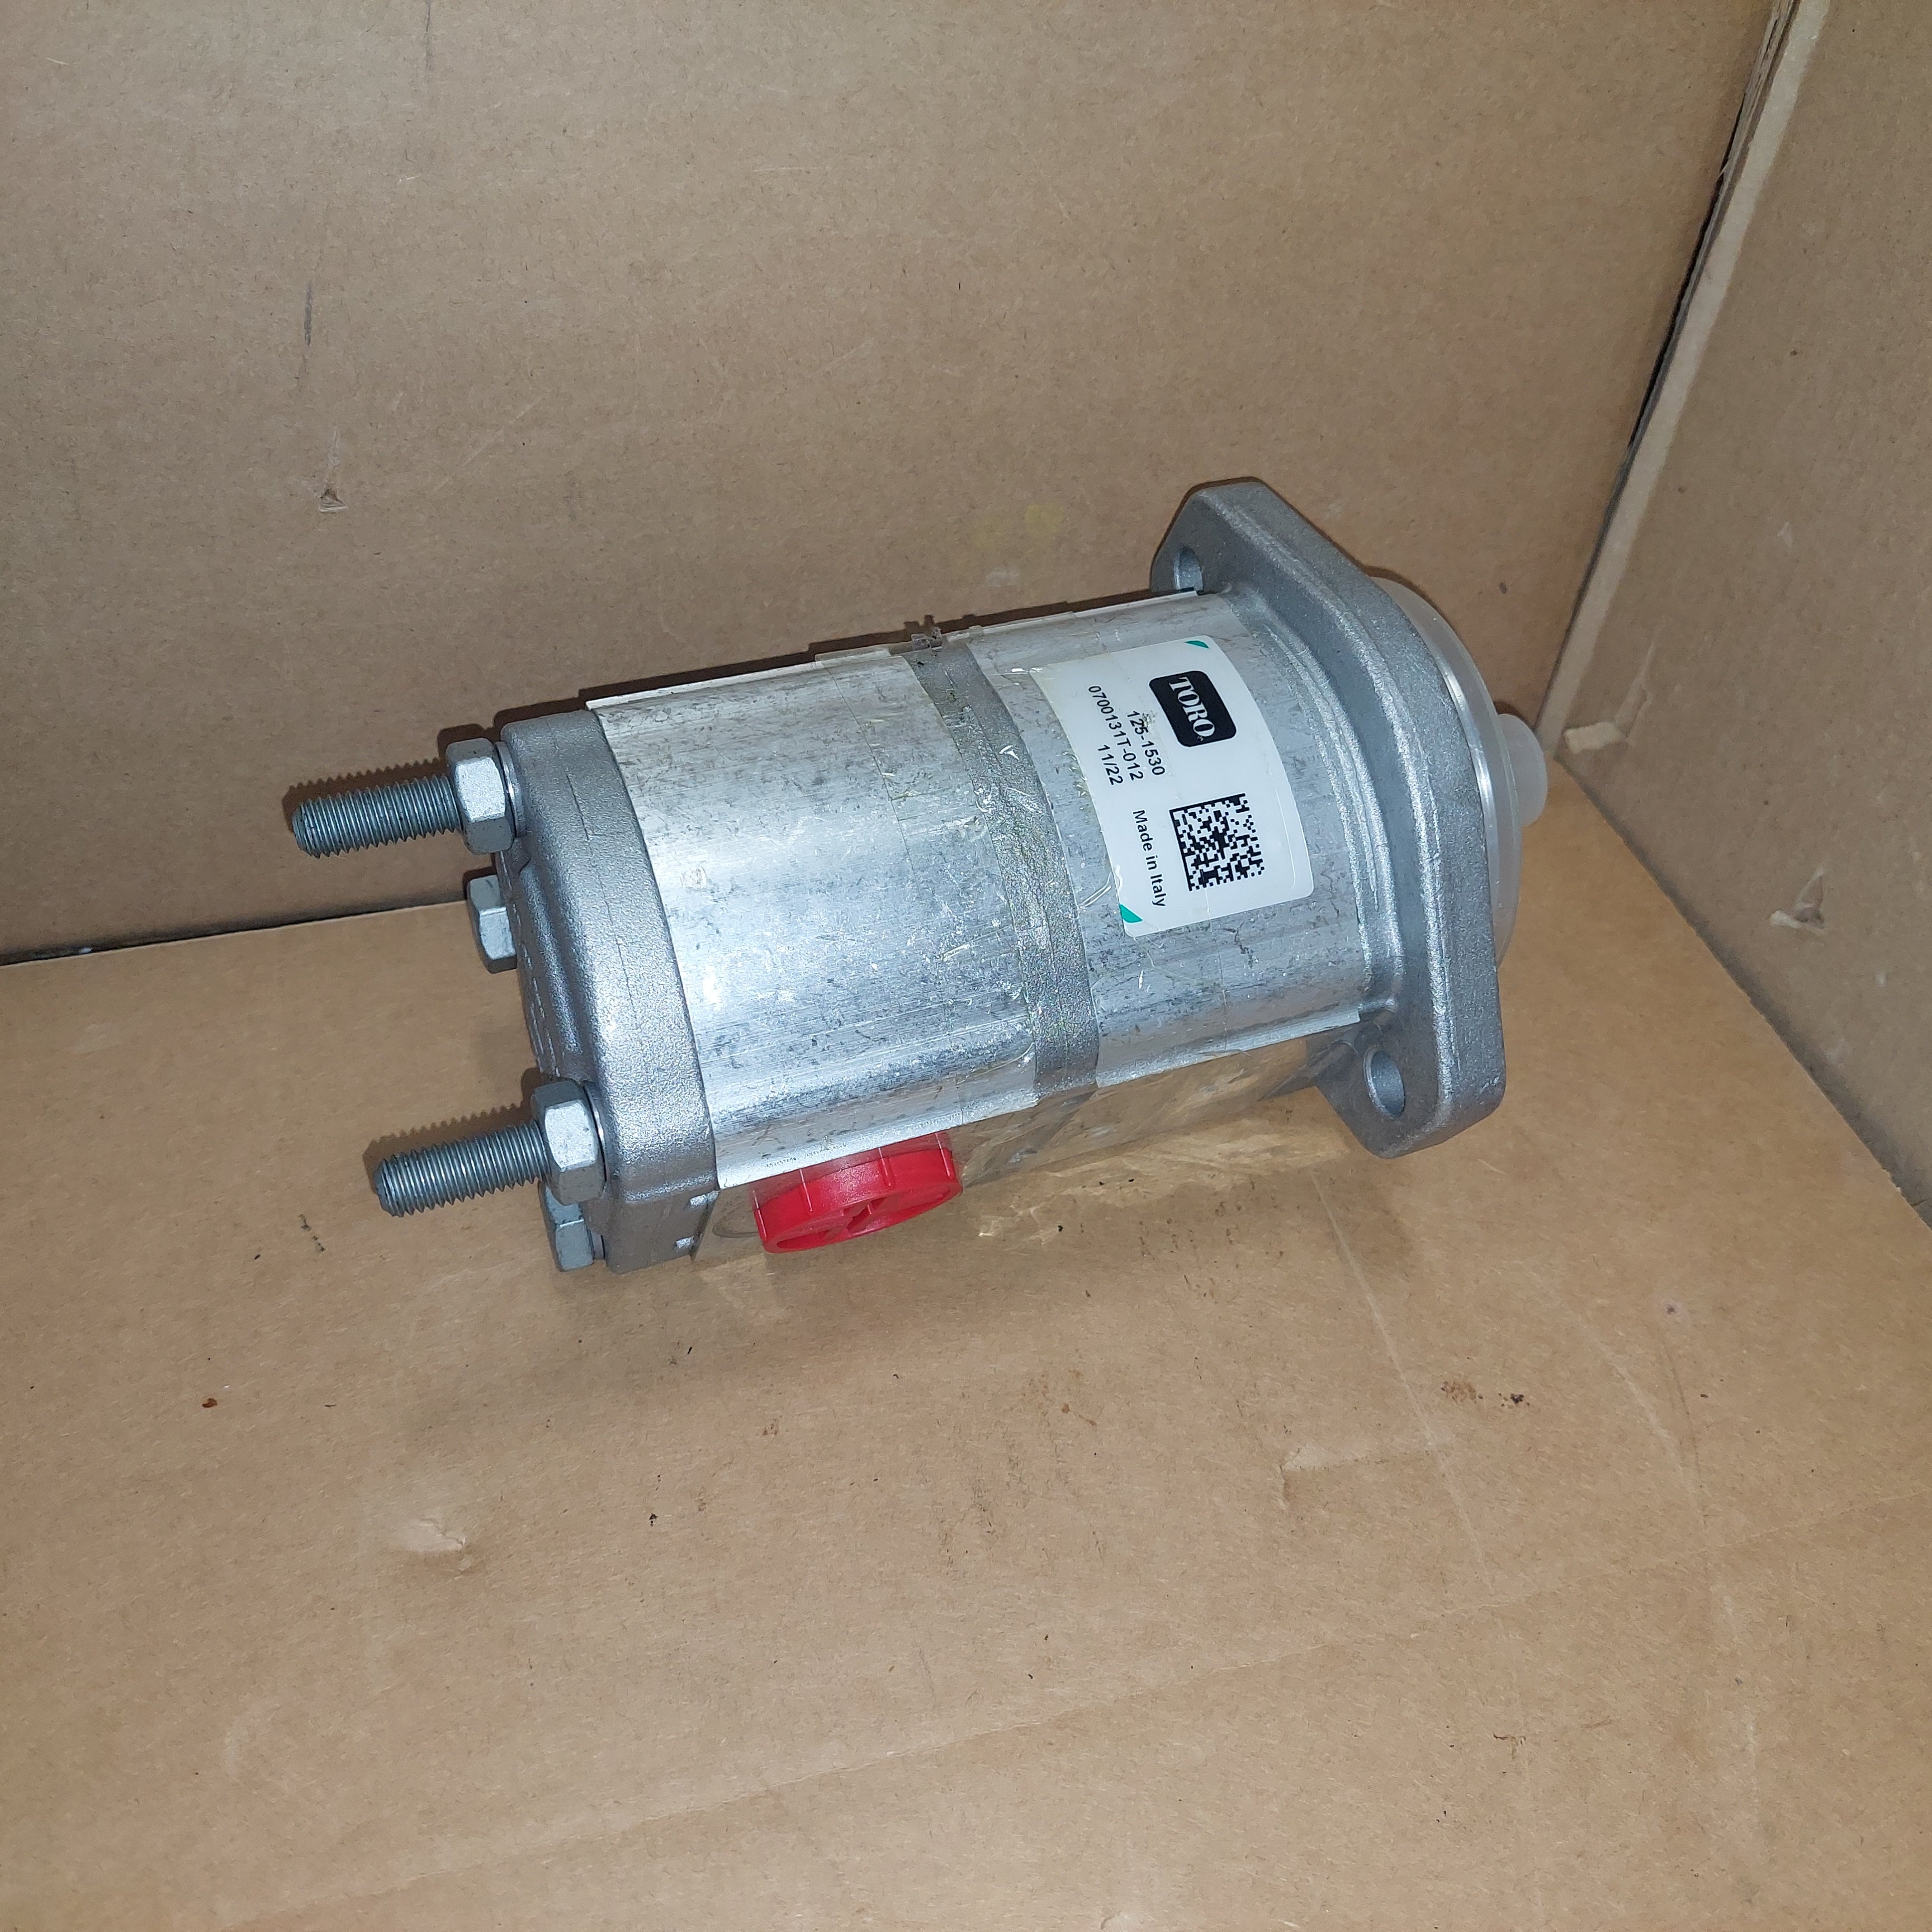 Toro 125-1530 Hydraulic Traction Motor for Reelmaster 5010-H New